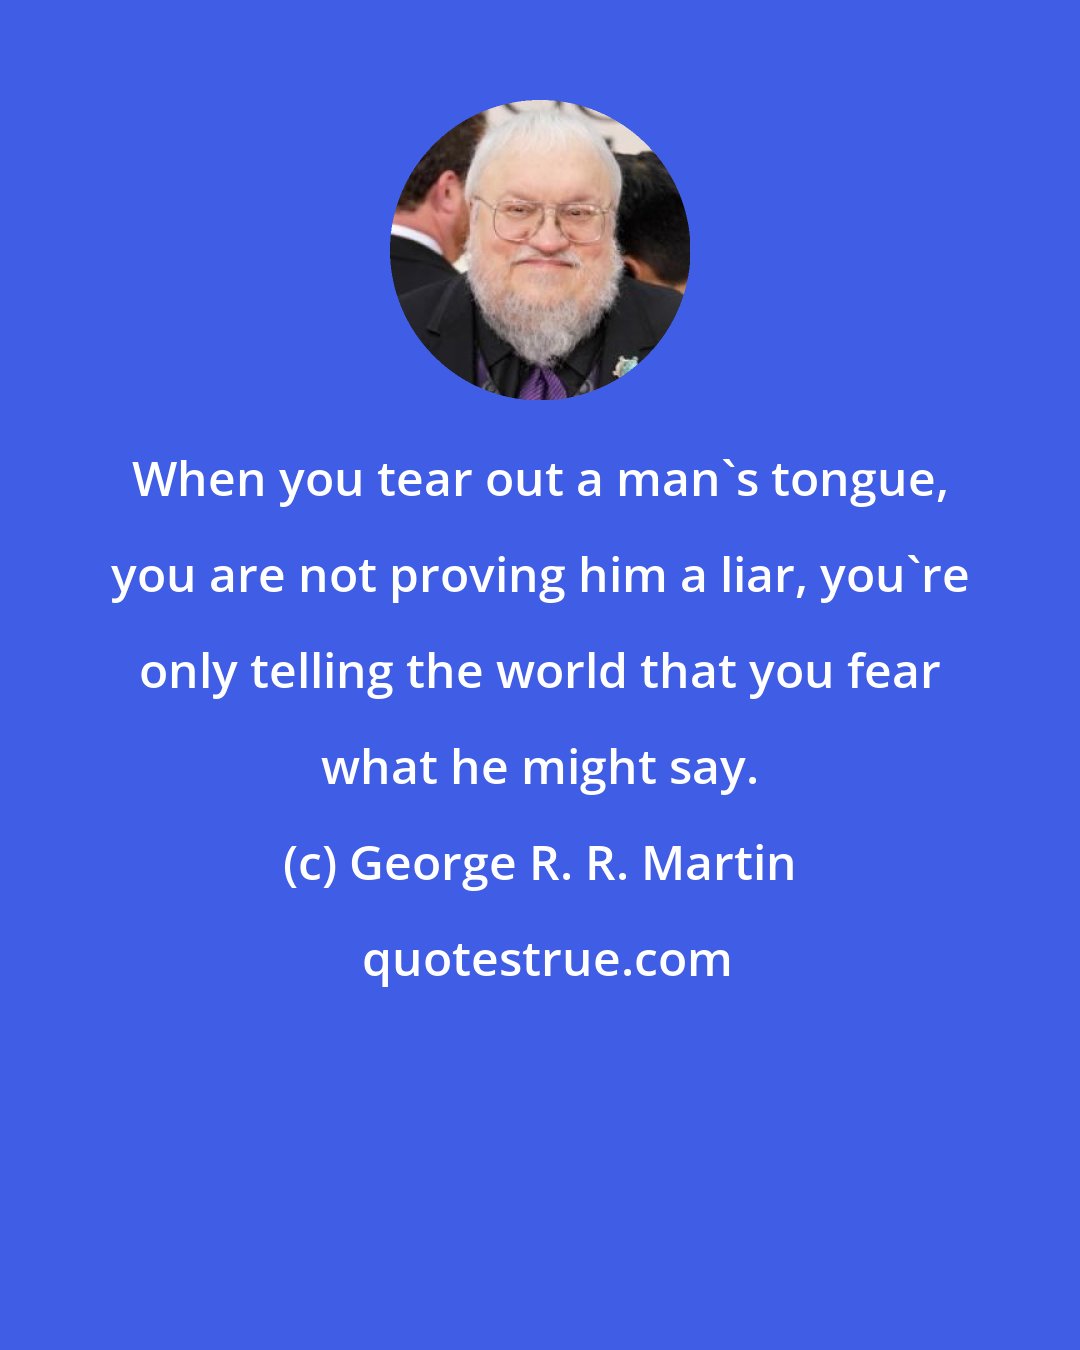 George R. R. Martin: When you tear out a man's tongue, you are not proving him a liar, you're only telling the world that you fear what he might say.